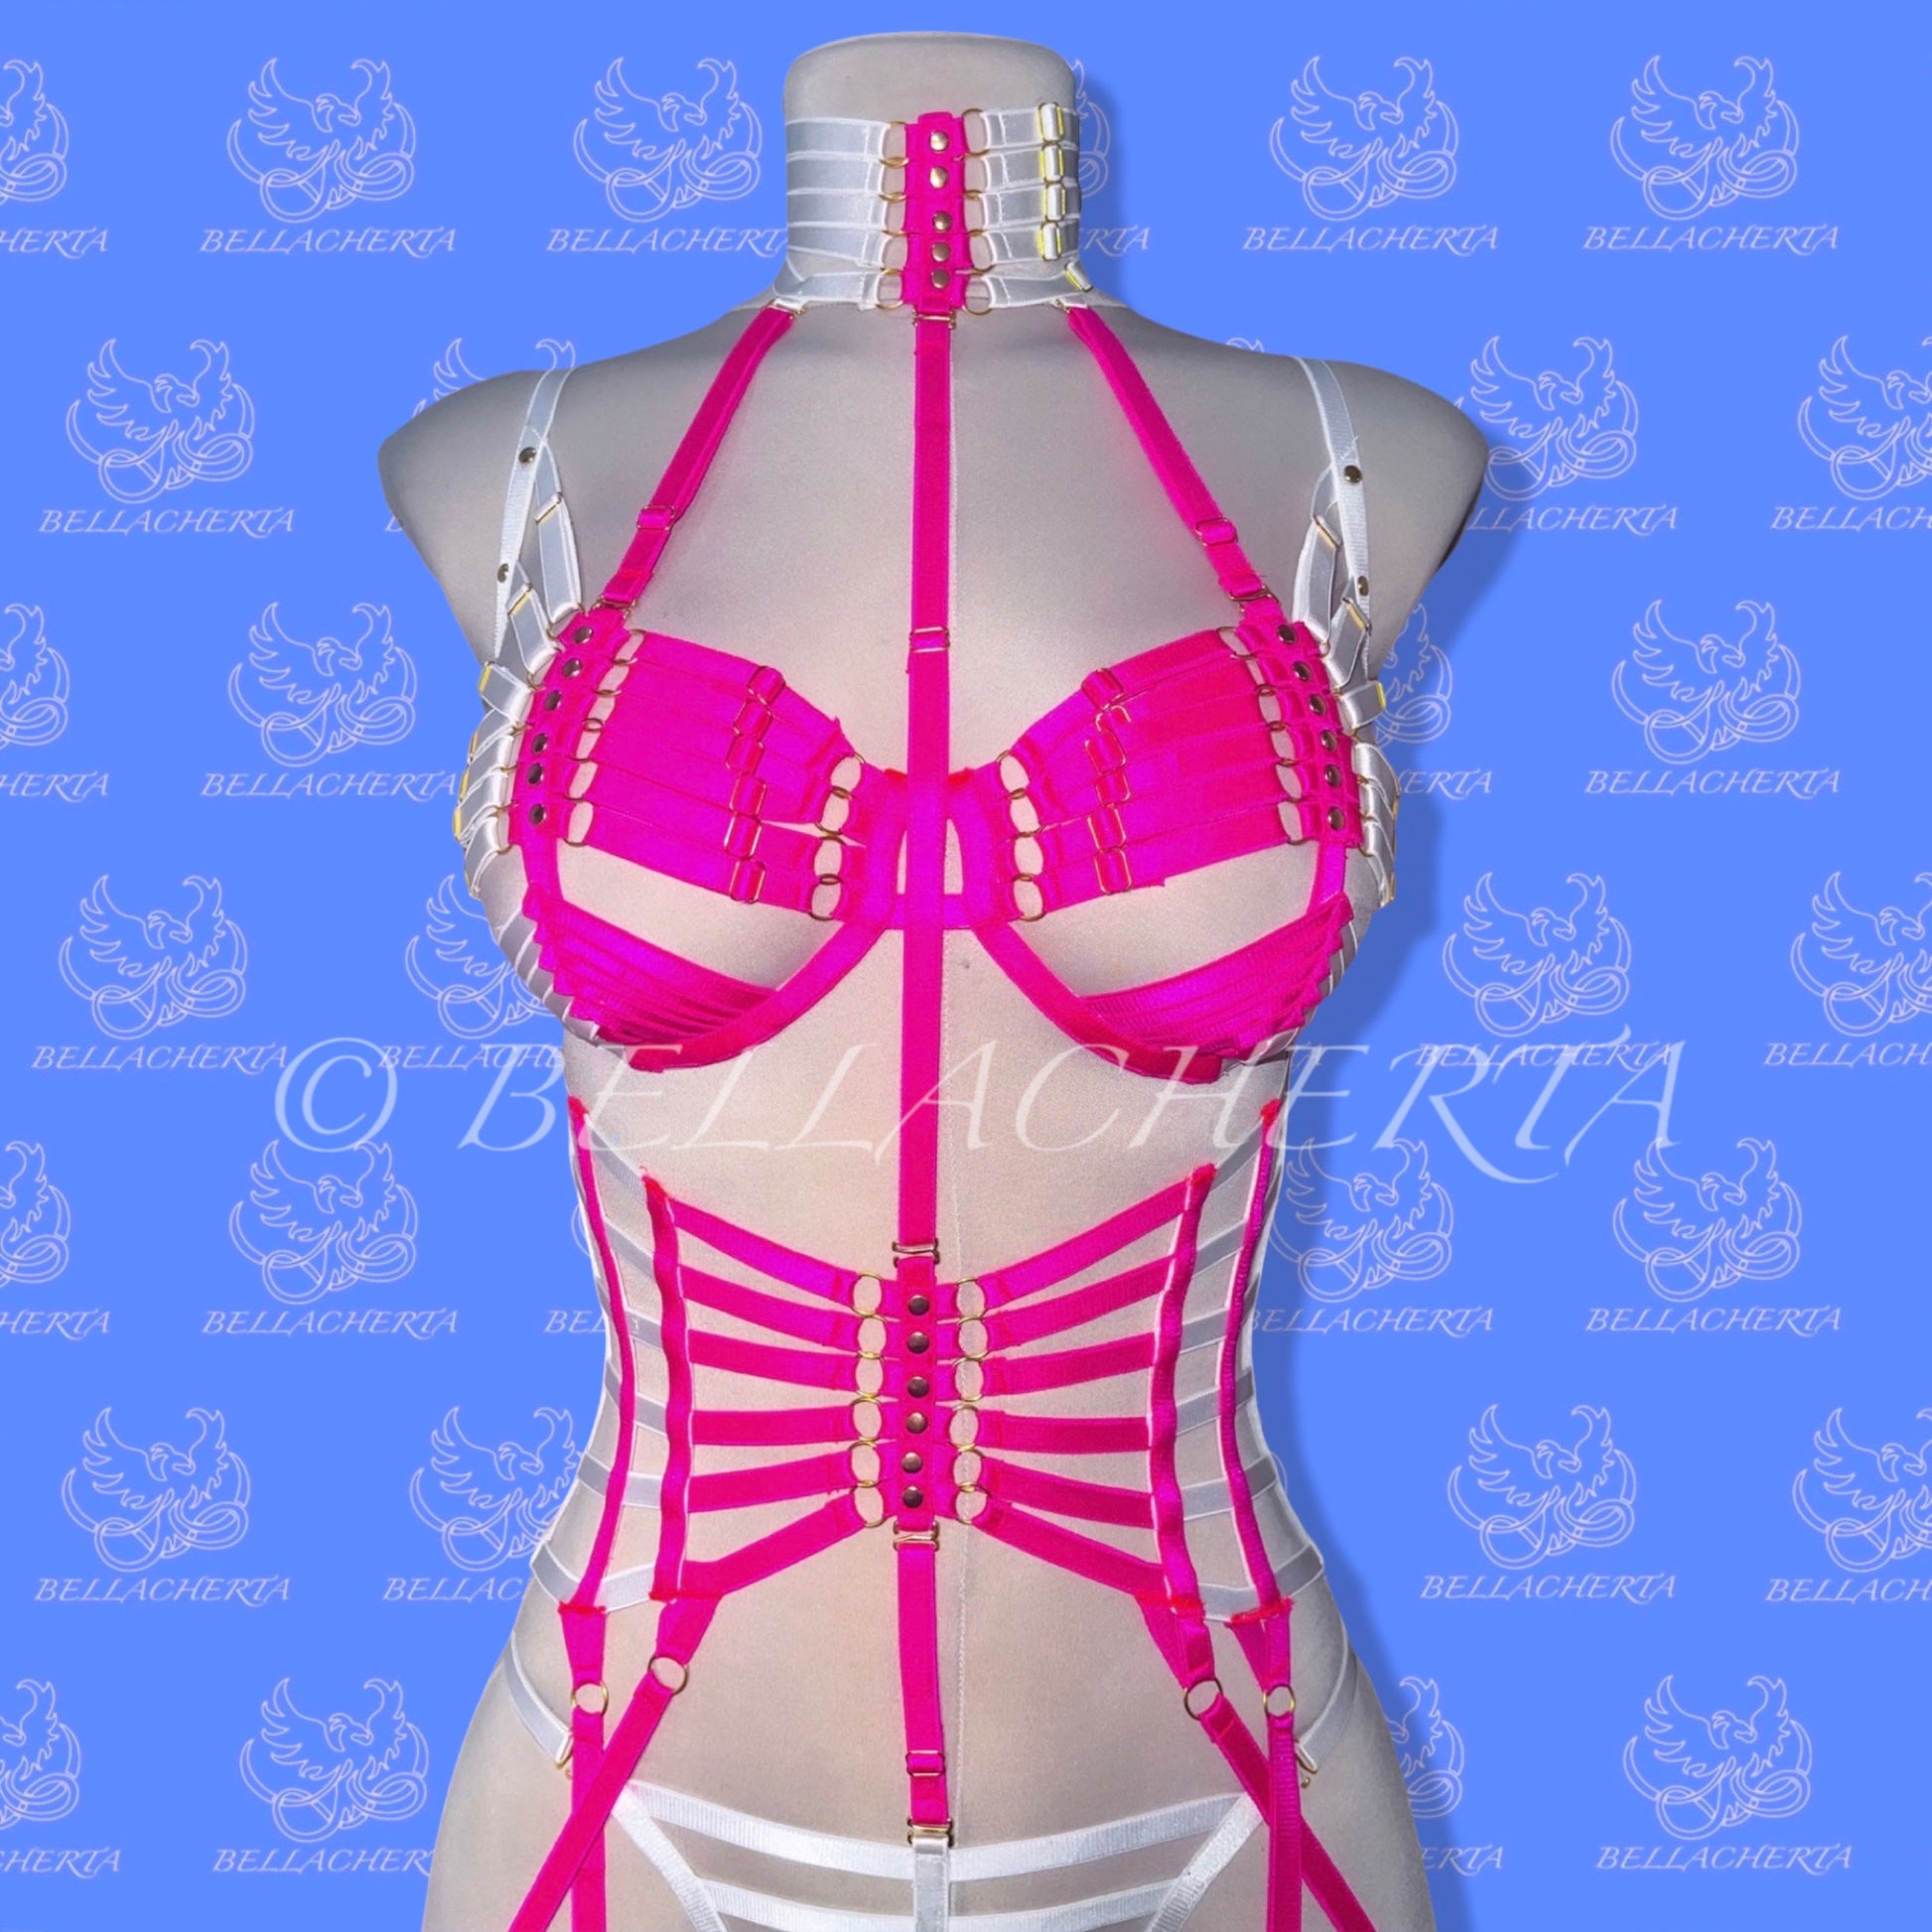 Full Body Harness Fluorescent Lingerie Strappy Two-Tone Bra with Matching Choker, Panties, Garter Belt and Garters, Glow in the Dark